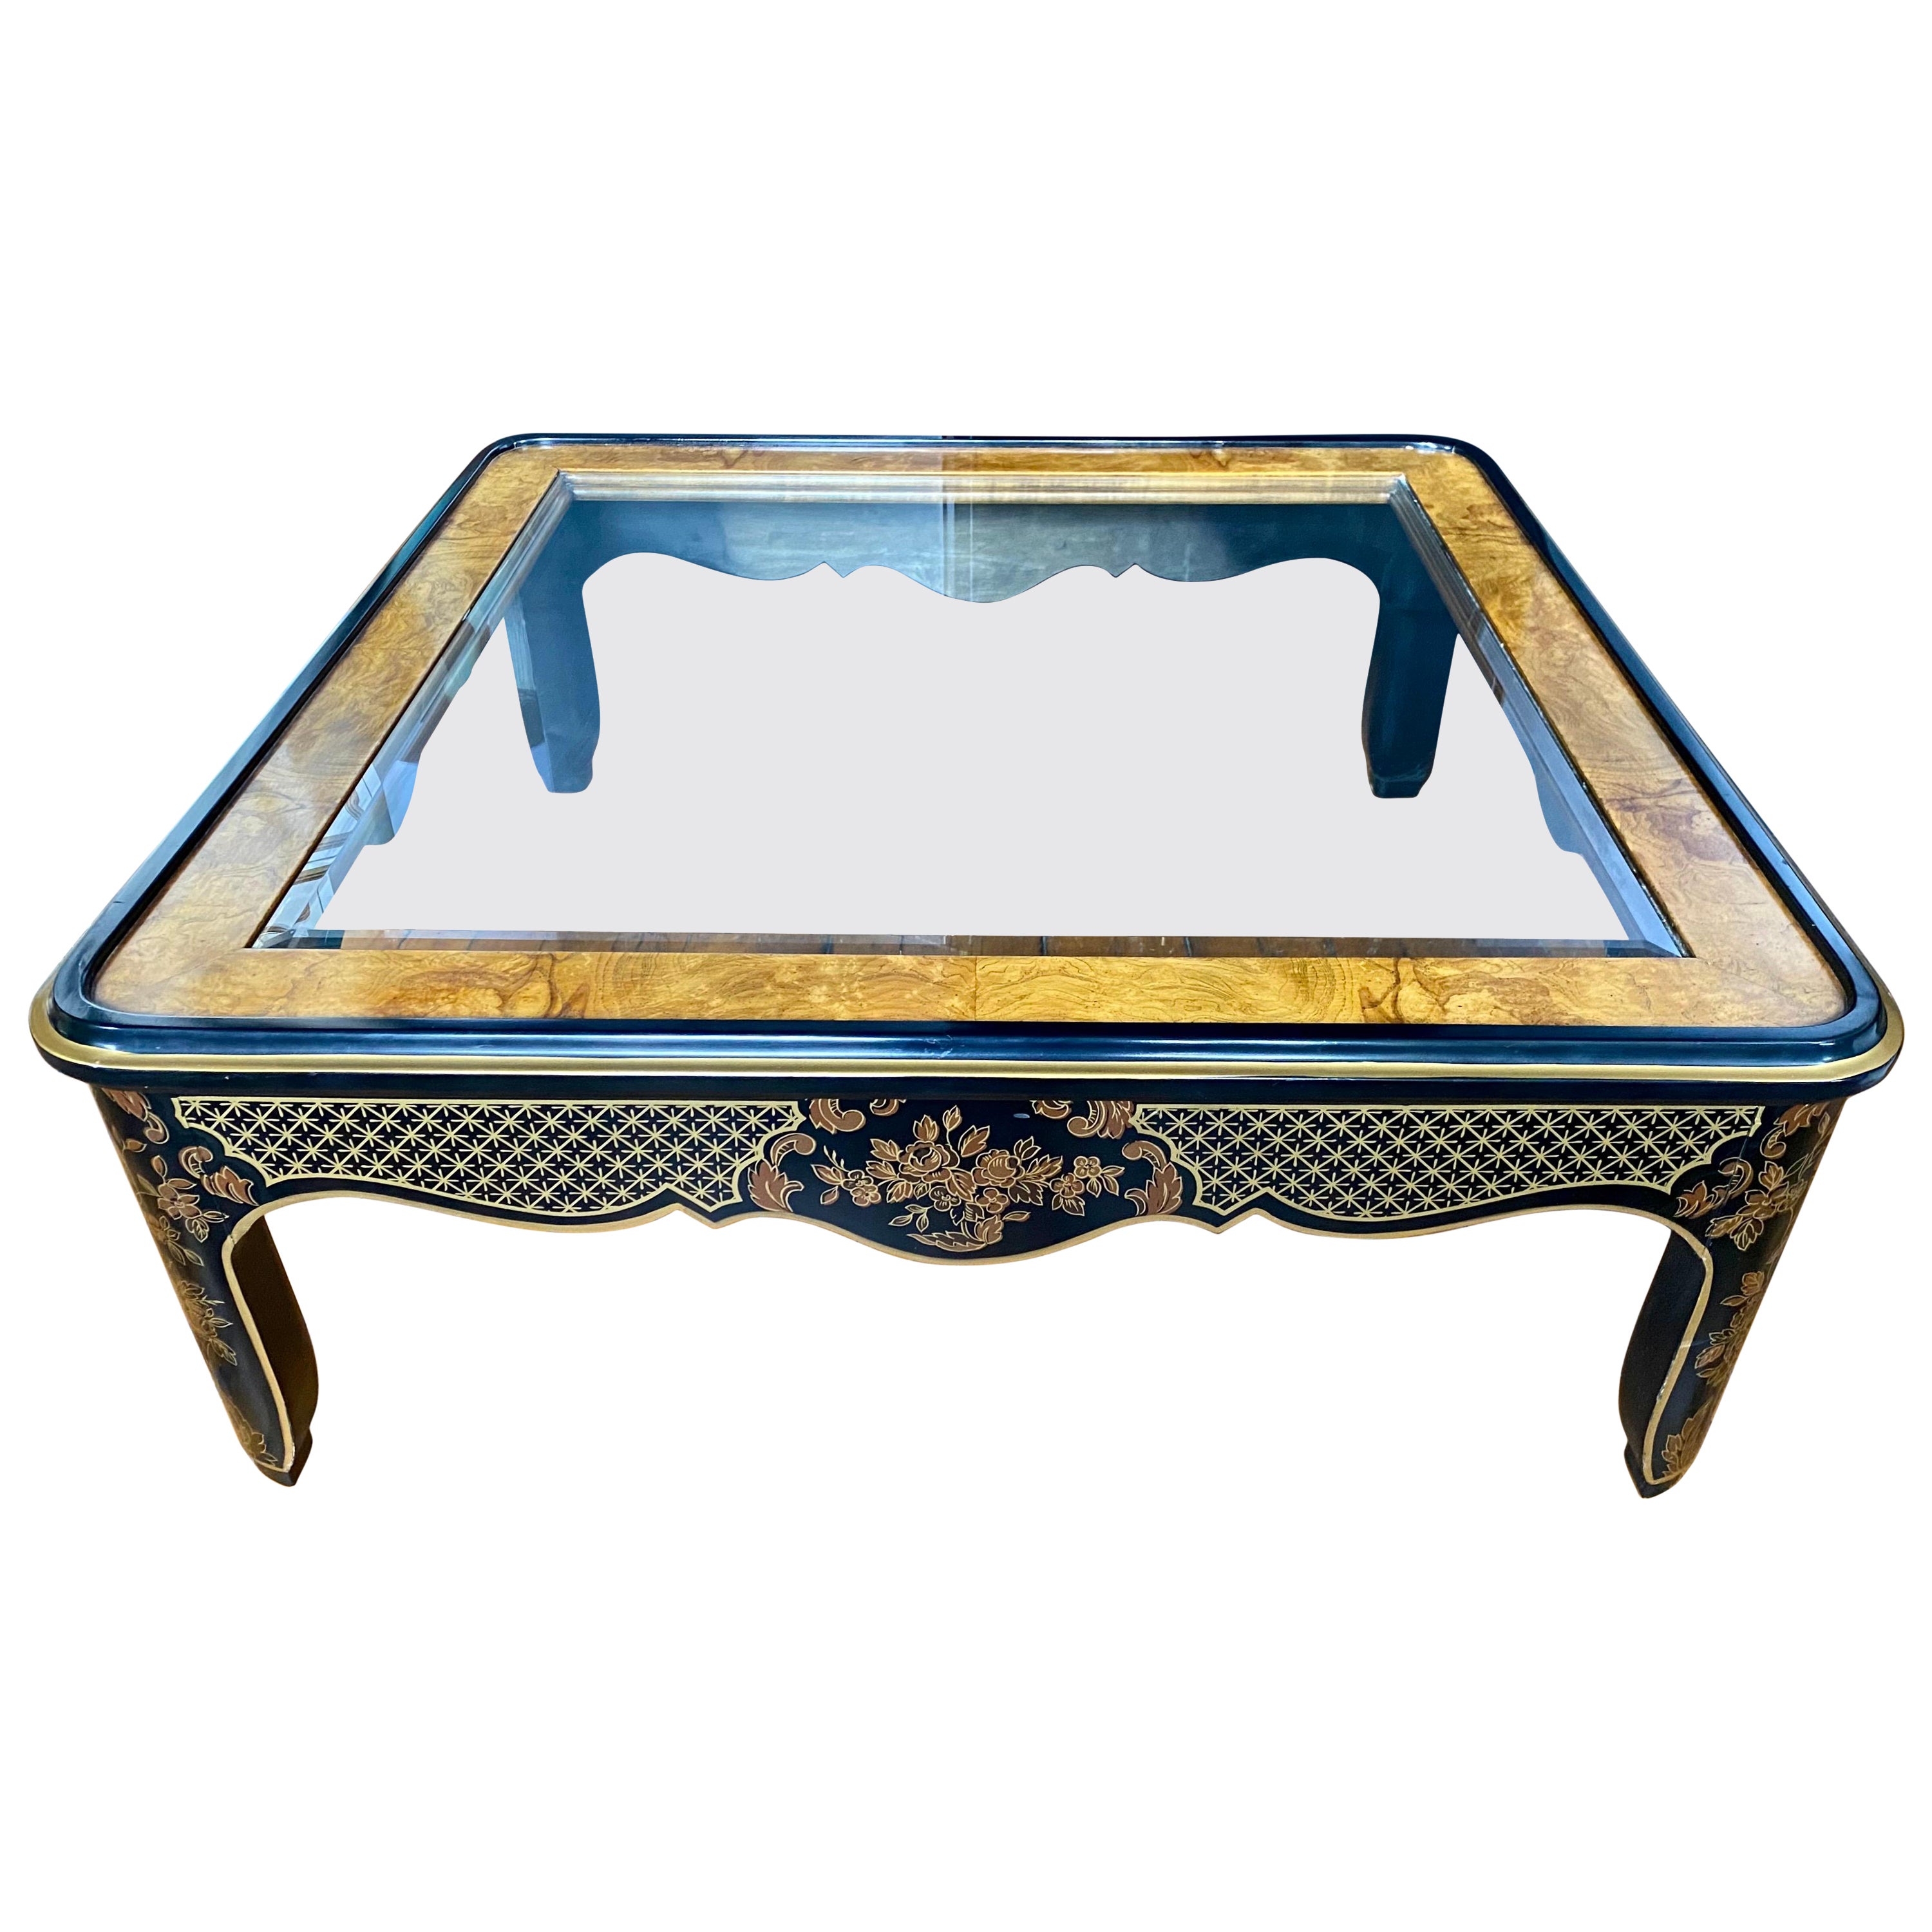 Hollywood Regency Chinoiserie Black & Gold Square Coffee Table, Drexel Et Cetera For Sale